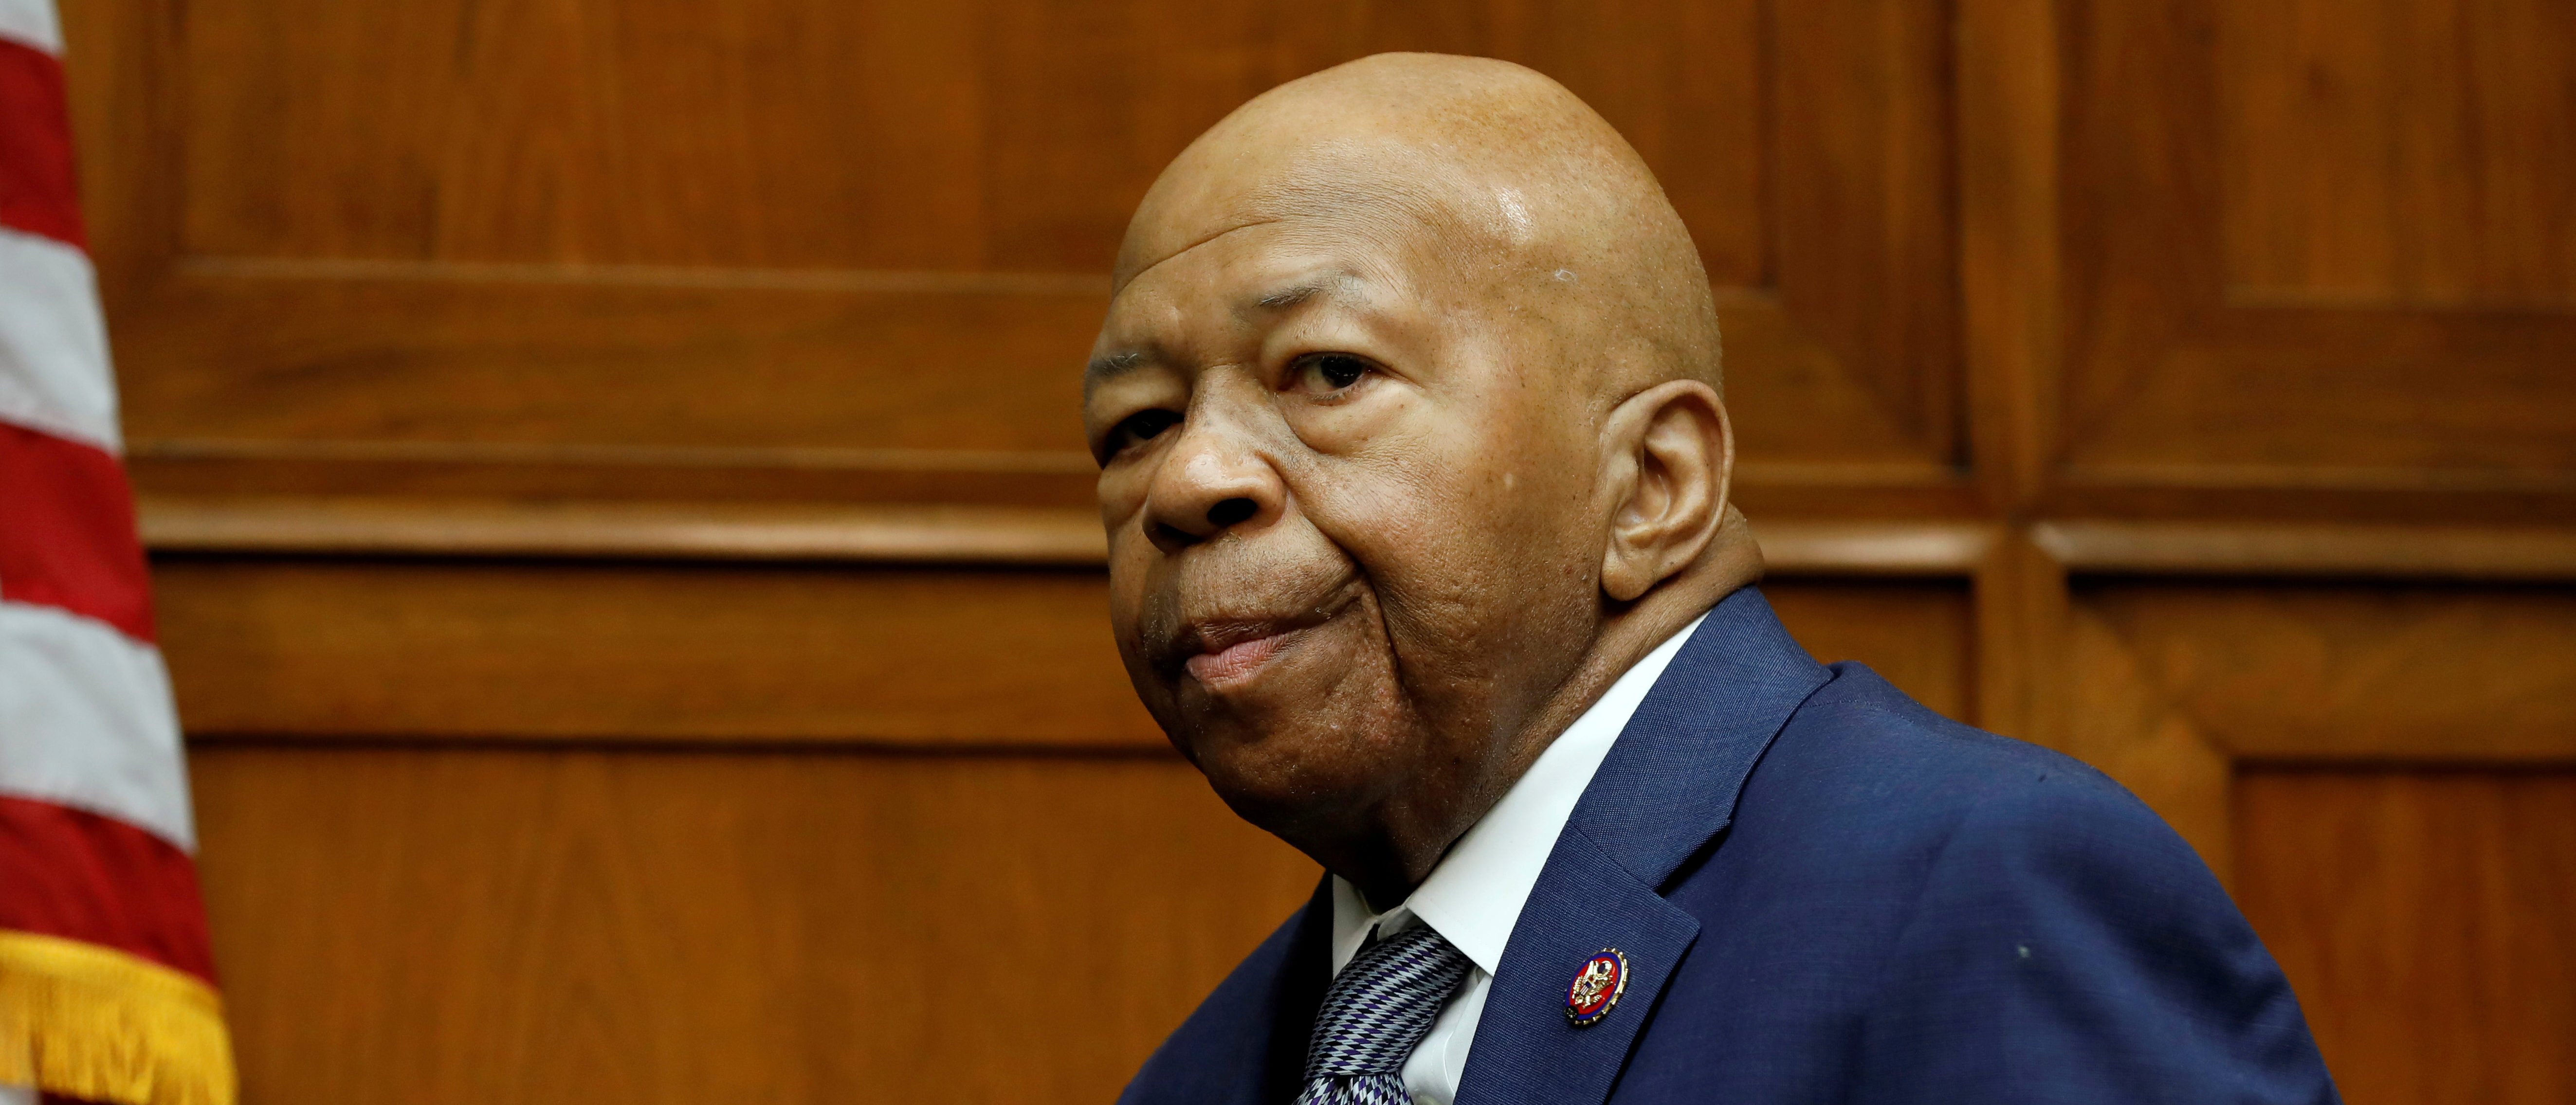 House Oversight and Reform Committee chairman Rep. Elijah Cummings (D-MD) arrives at the committee contempt votes on whether to find Attorney General William Barr and Commerce Secretary Wilbur Ross in contempt of Congress for withholding Census documents on Capitol Hill in Washington, U.S., June 12, 2019. REUTERS/Yuri Gripas/File Photo